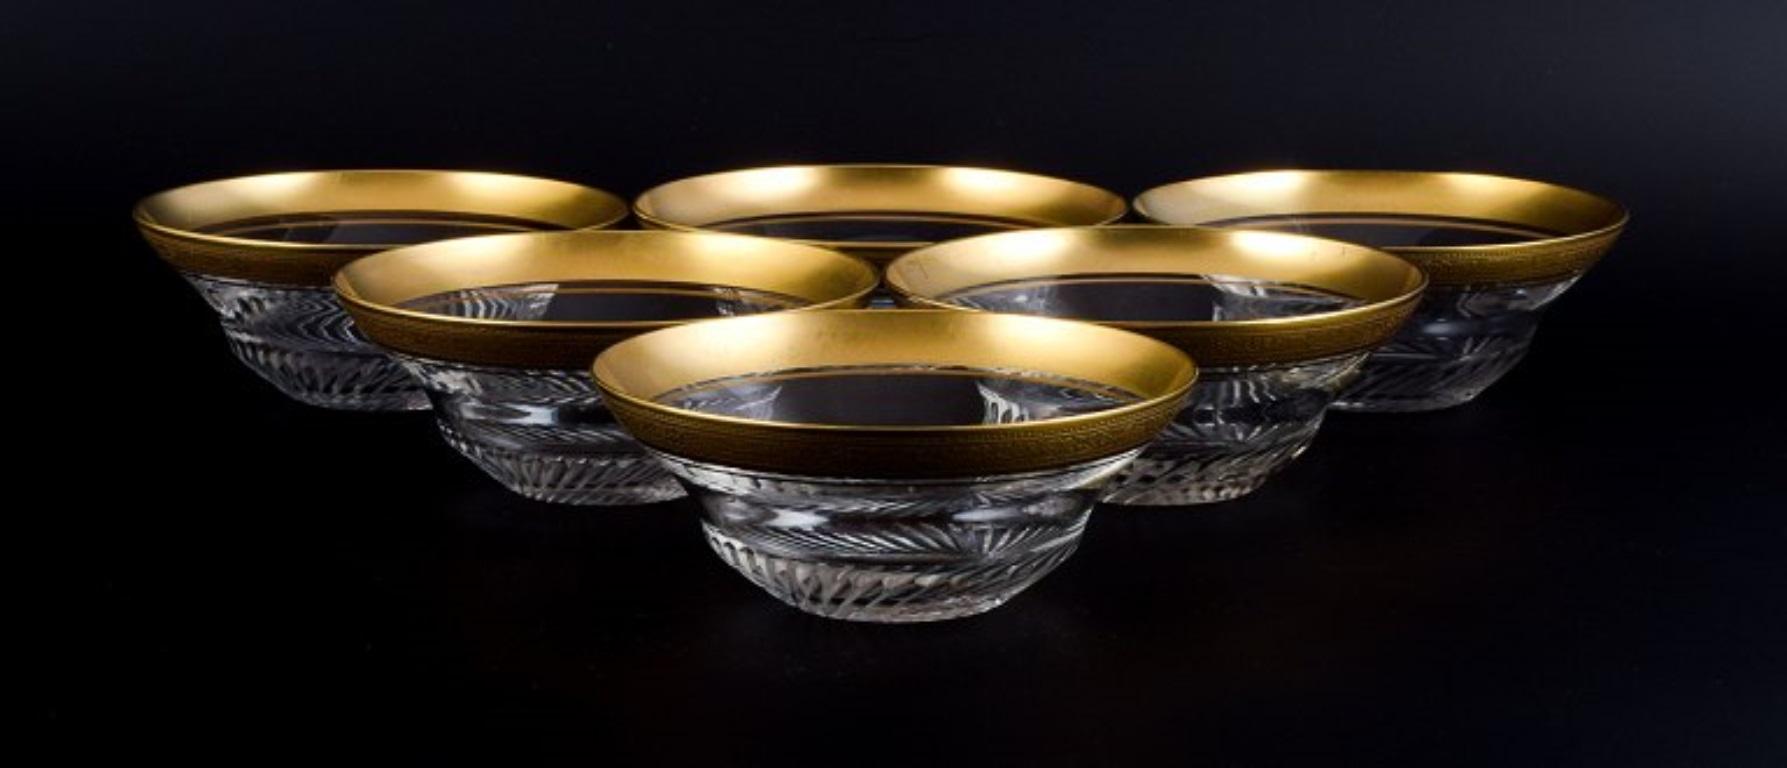 Rimpler Kristall, Zwiesel, Germany, six hand-blown crystal fingerbowls with gold rim decorated with grapes and vine leaves.
1960s.
In perfect condition.
Dimensions: D 12.5 x H 5.0 cm.